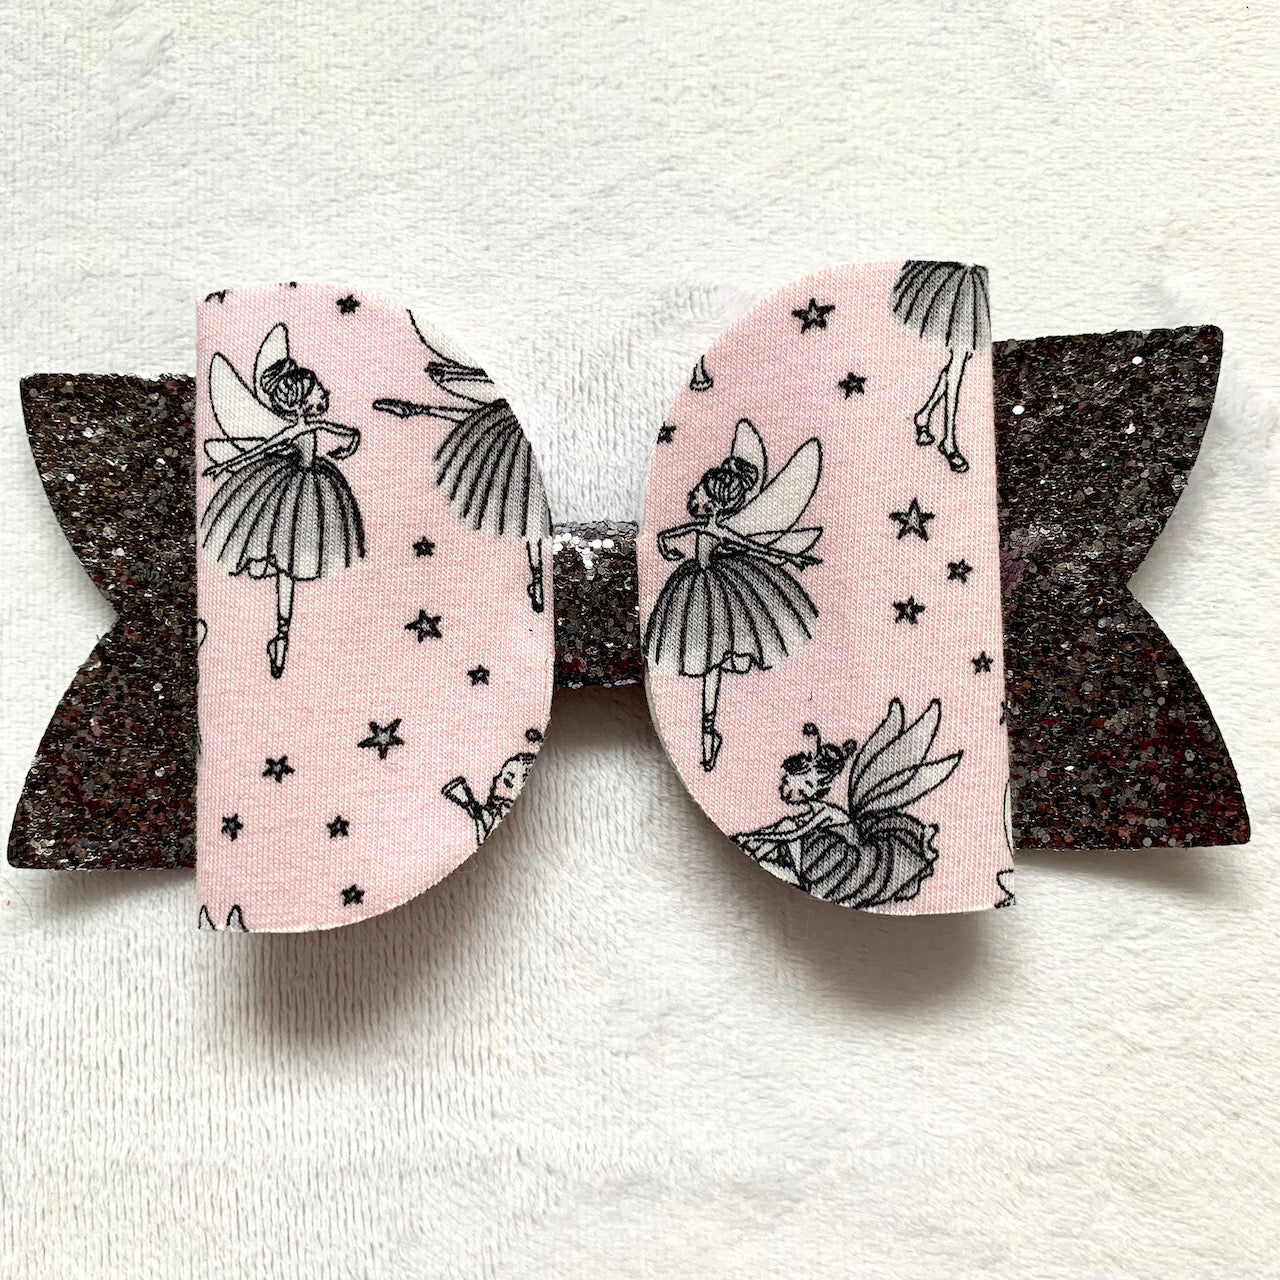 Butterfly Bow Templates for making hair bows